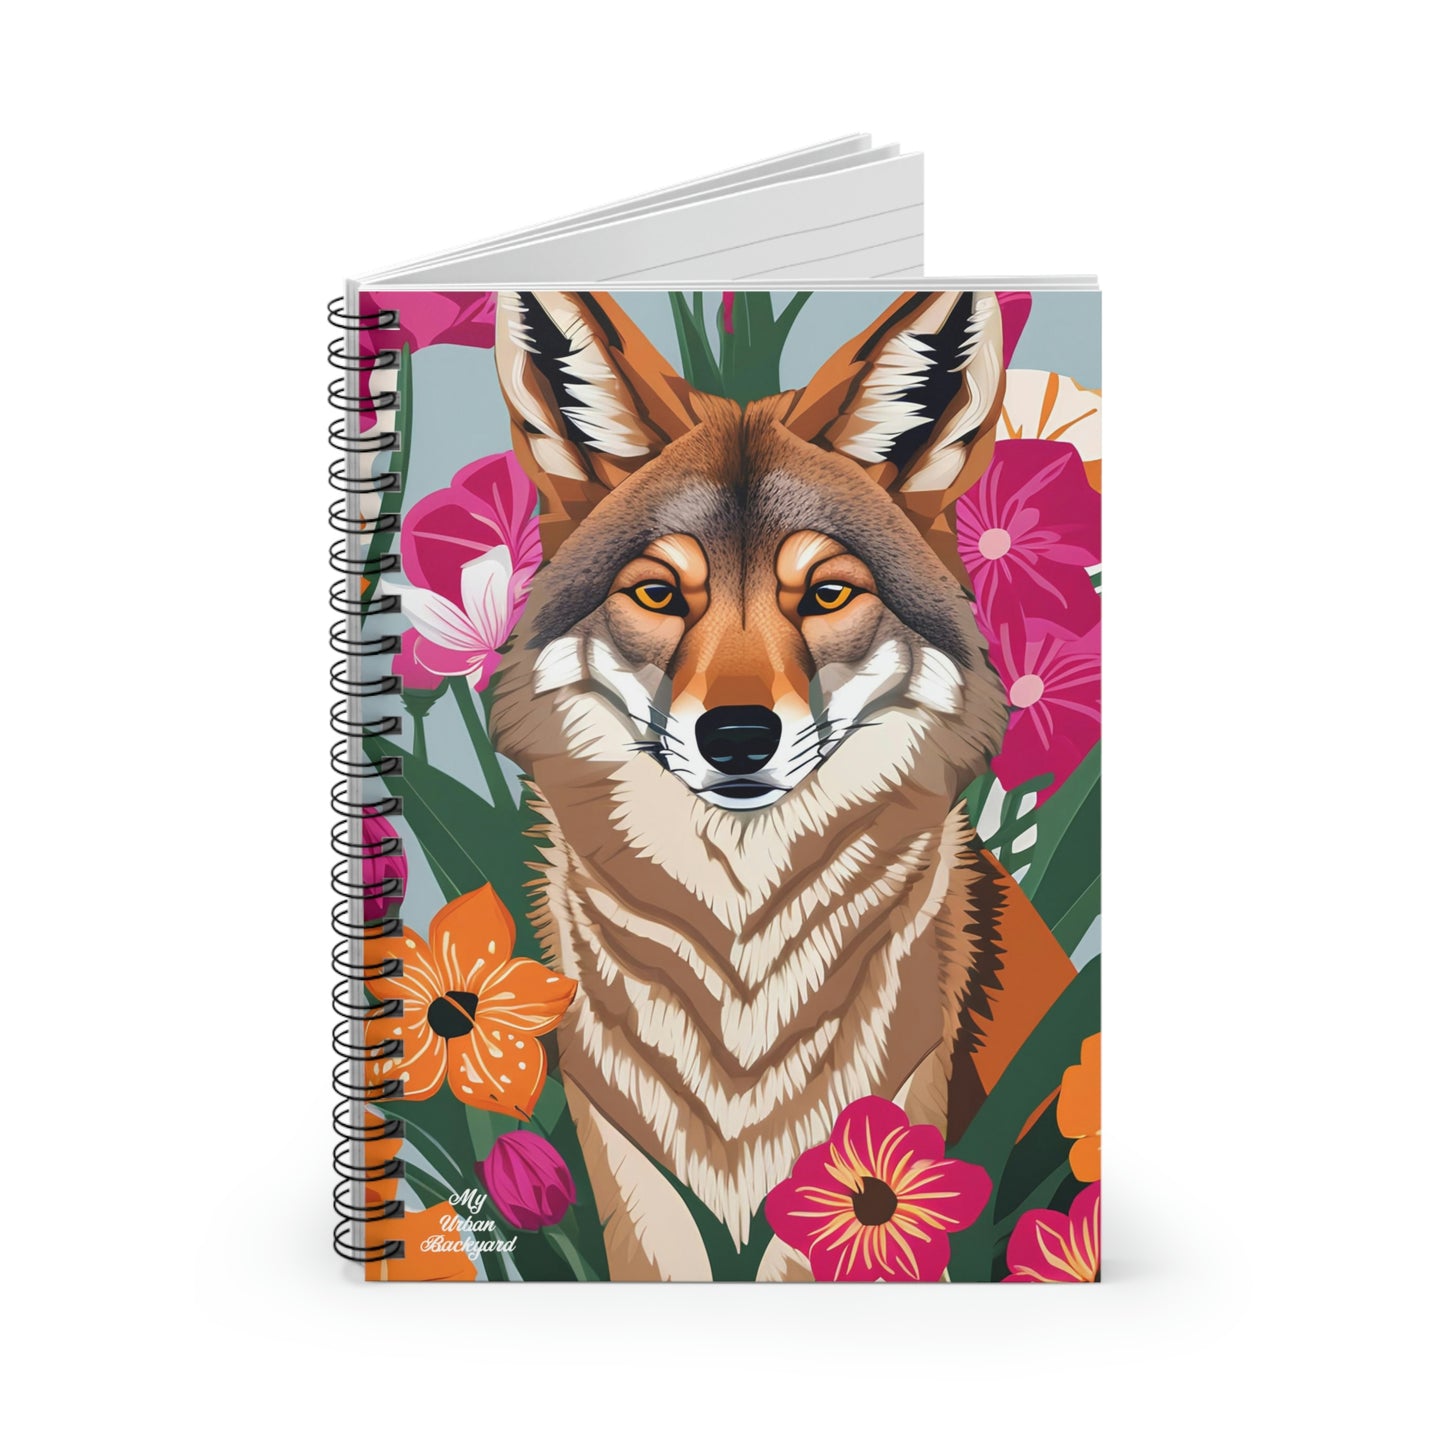 Coyote and Vibrant Flowers, Spiral Notebook Journal - Write in Style